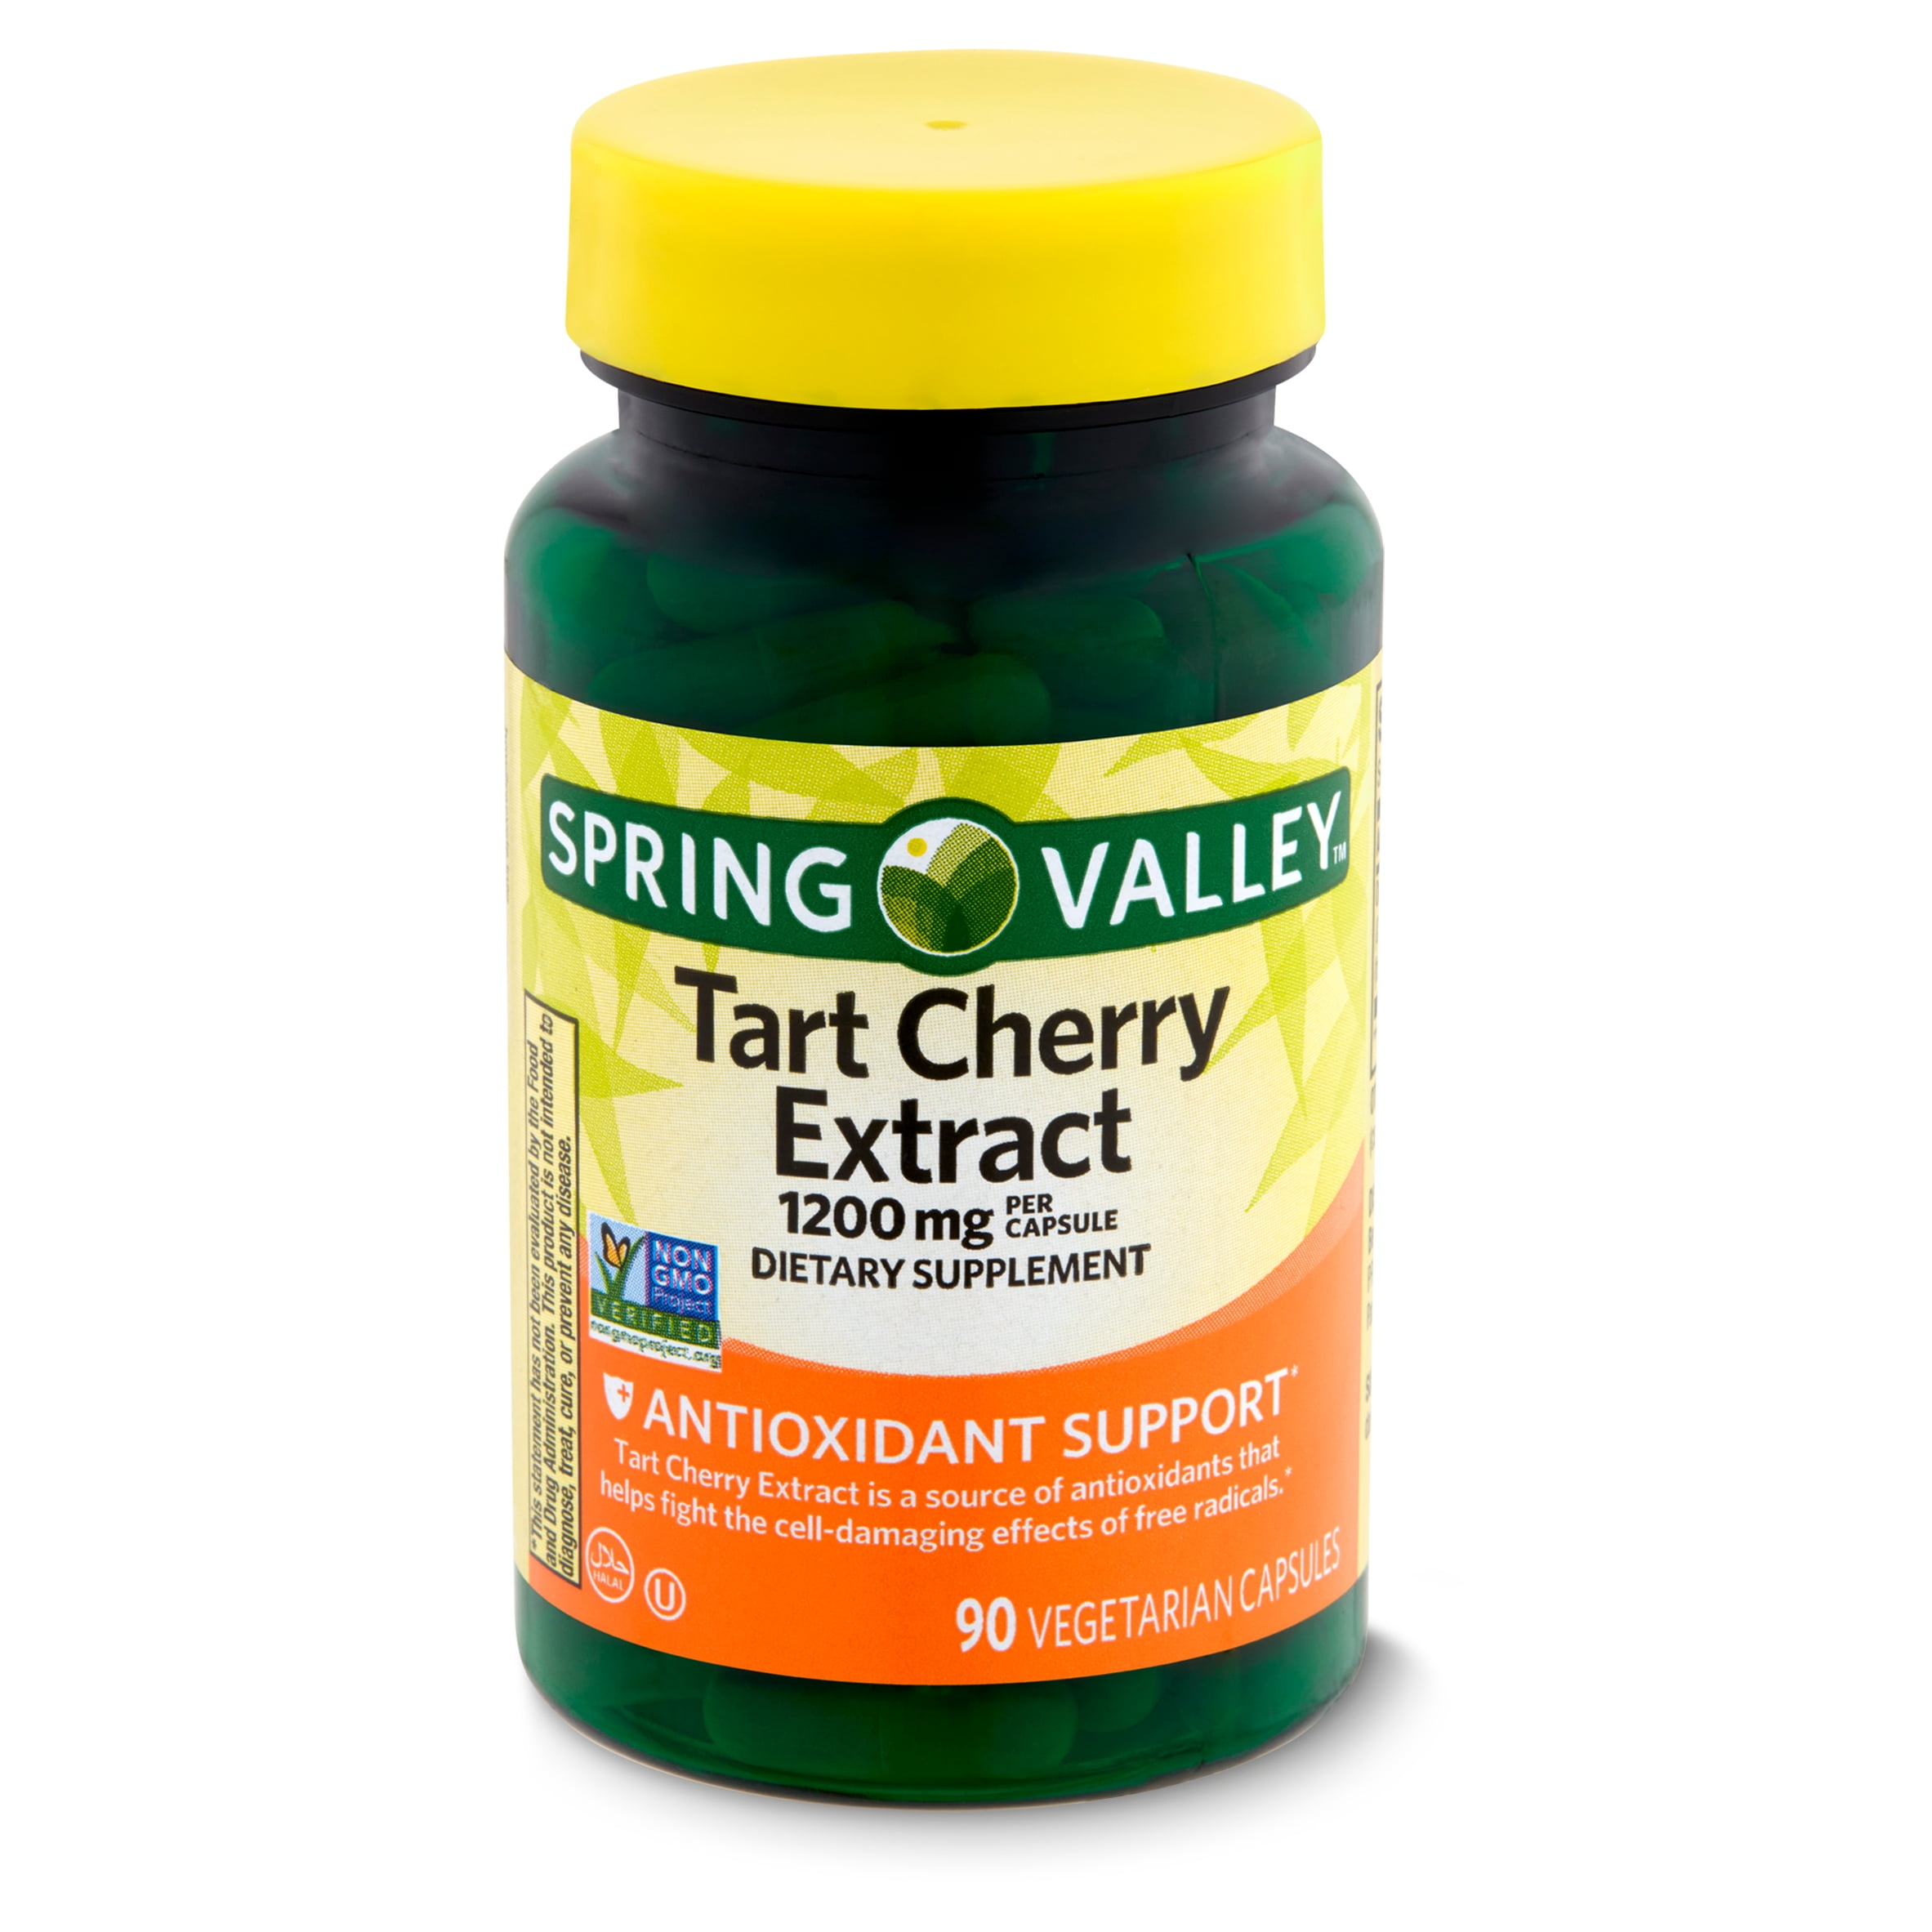 Spring Valley Tart Cherry Extract Dietary Supplement, 1200 mg, 90 count